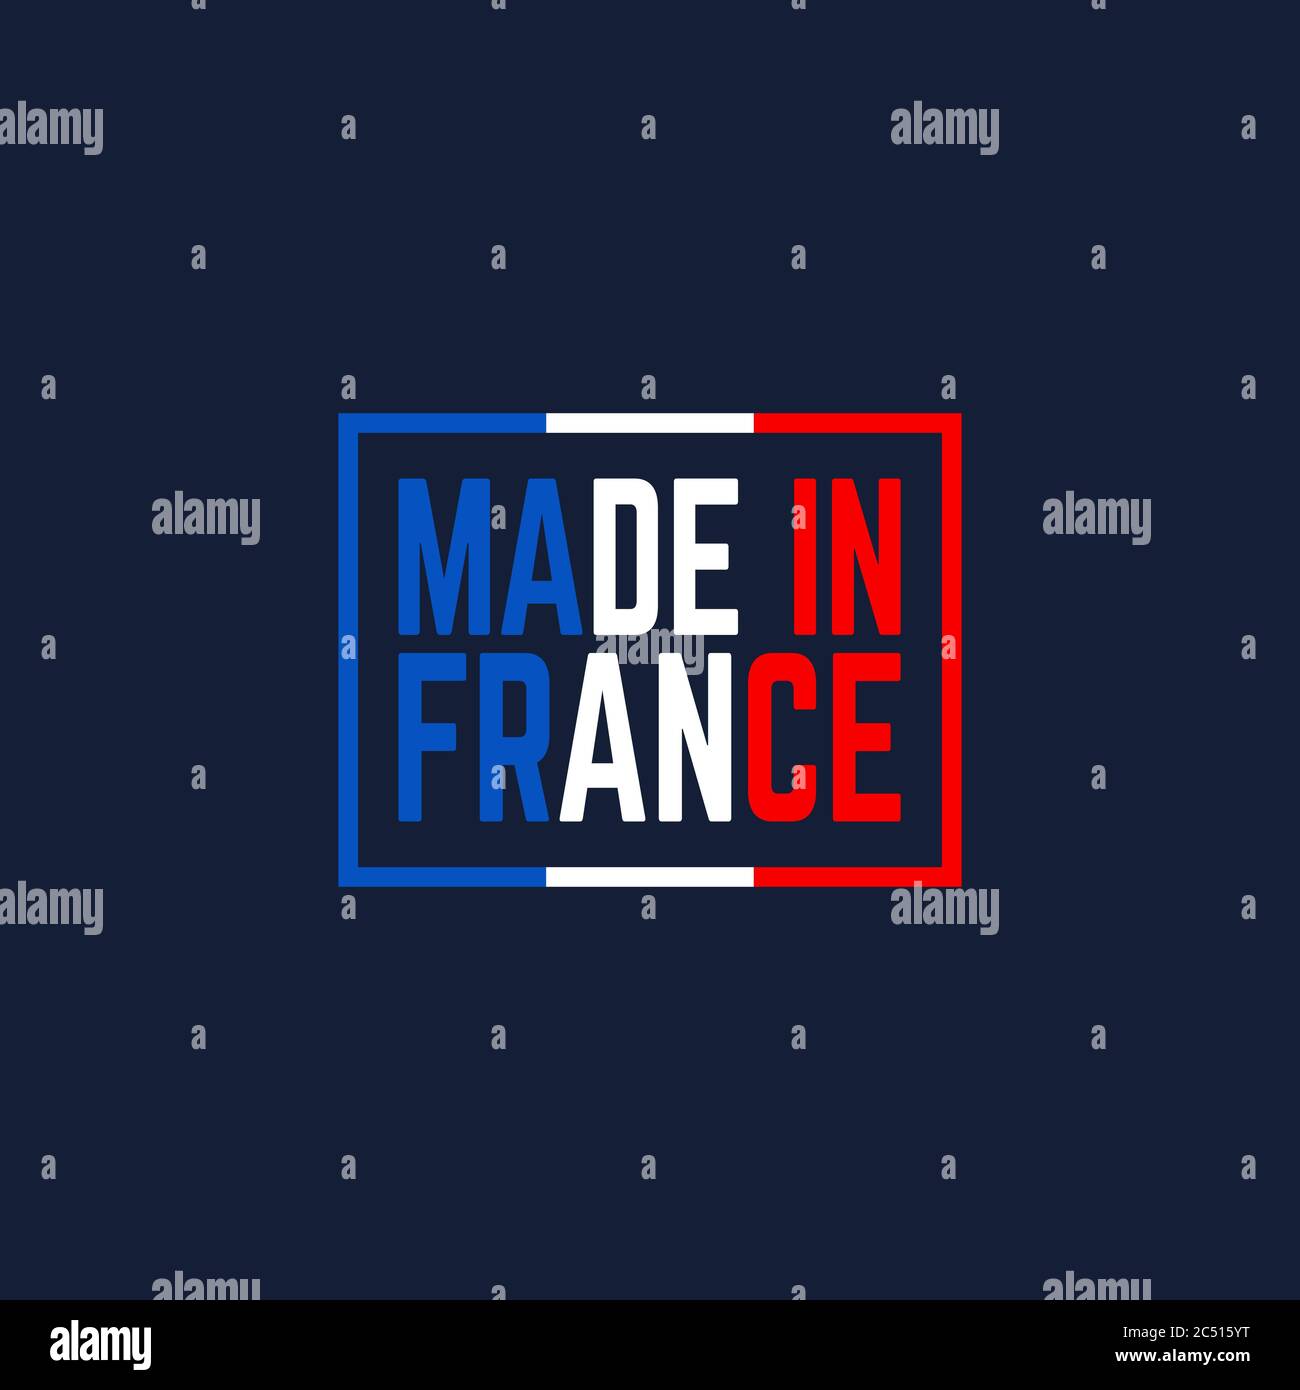 colorful made in france logo Stock Vector